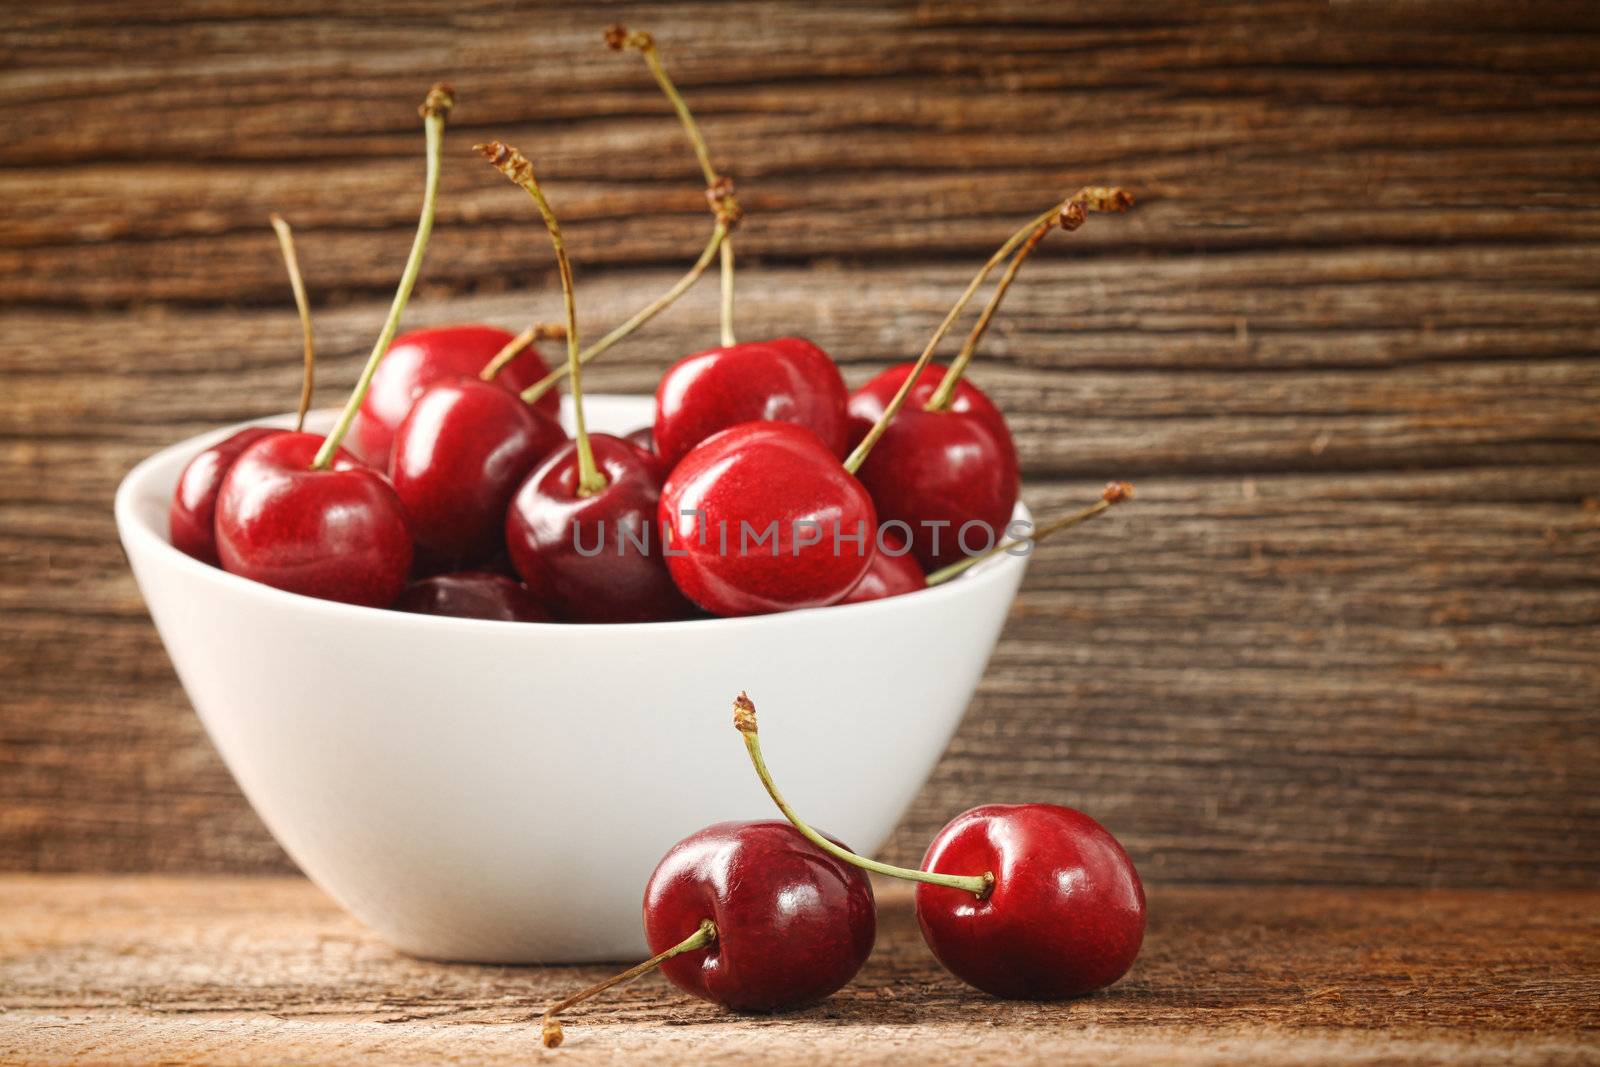 Red cherries in bowl on barn wood by Sandralise